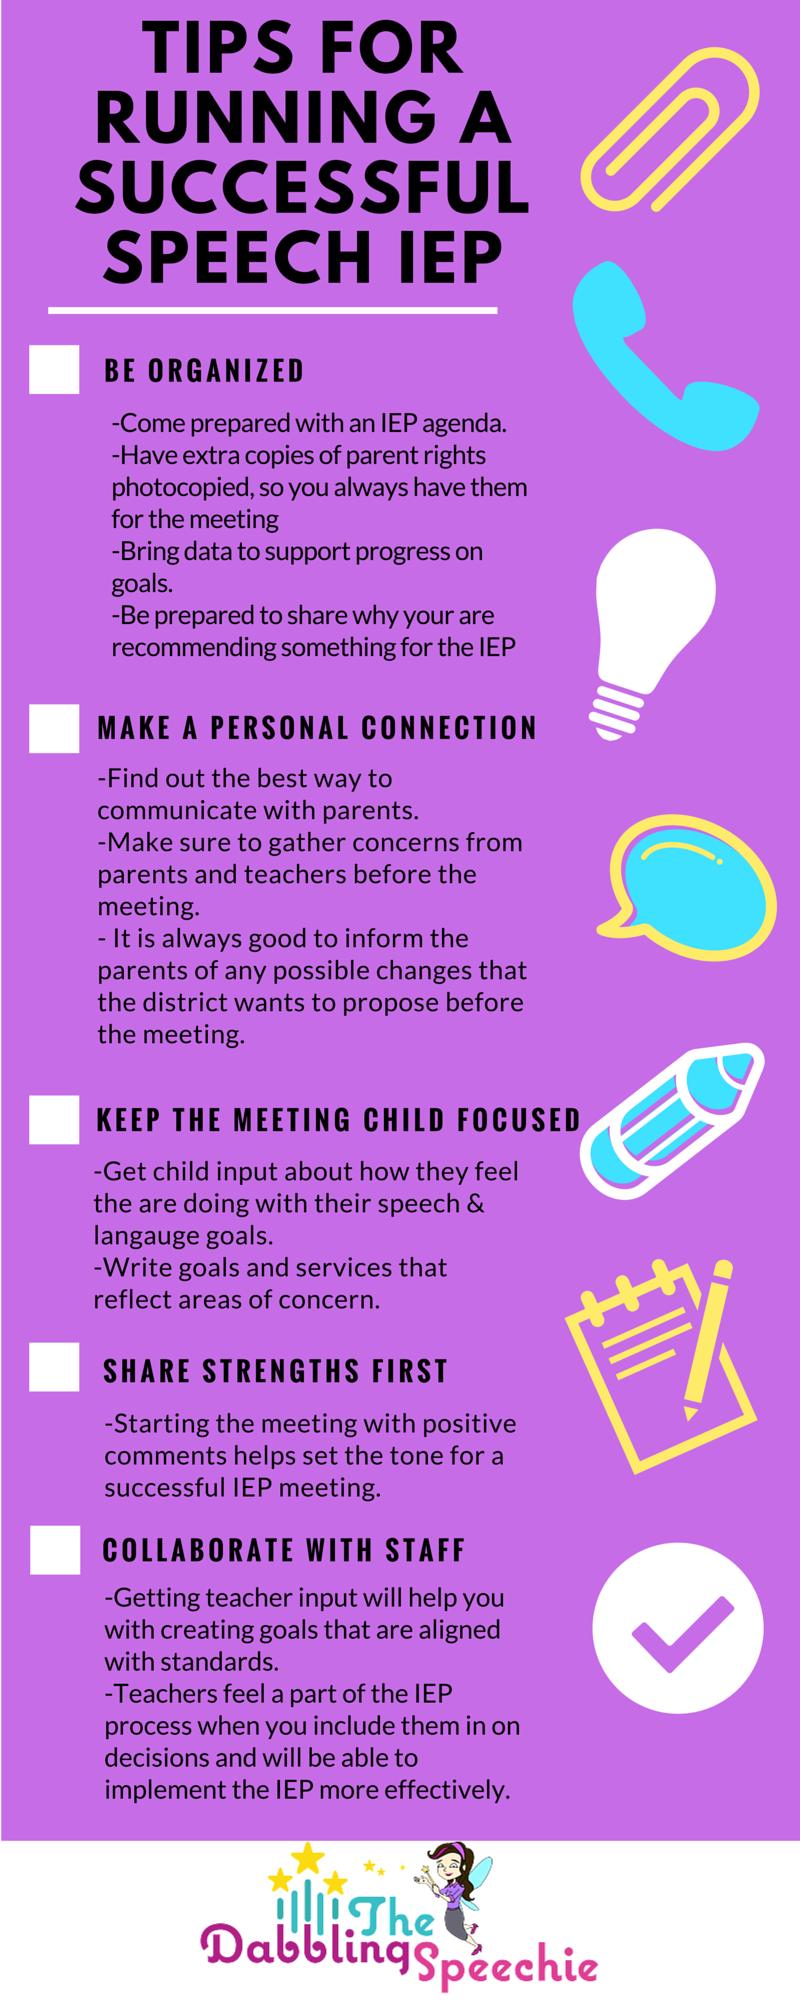 IEP Signing: Understanding Your Role and Options